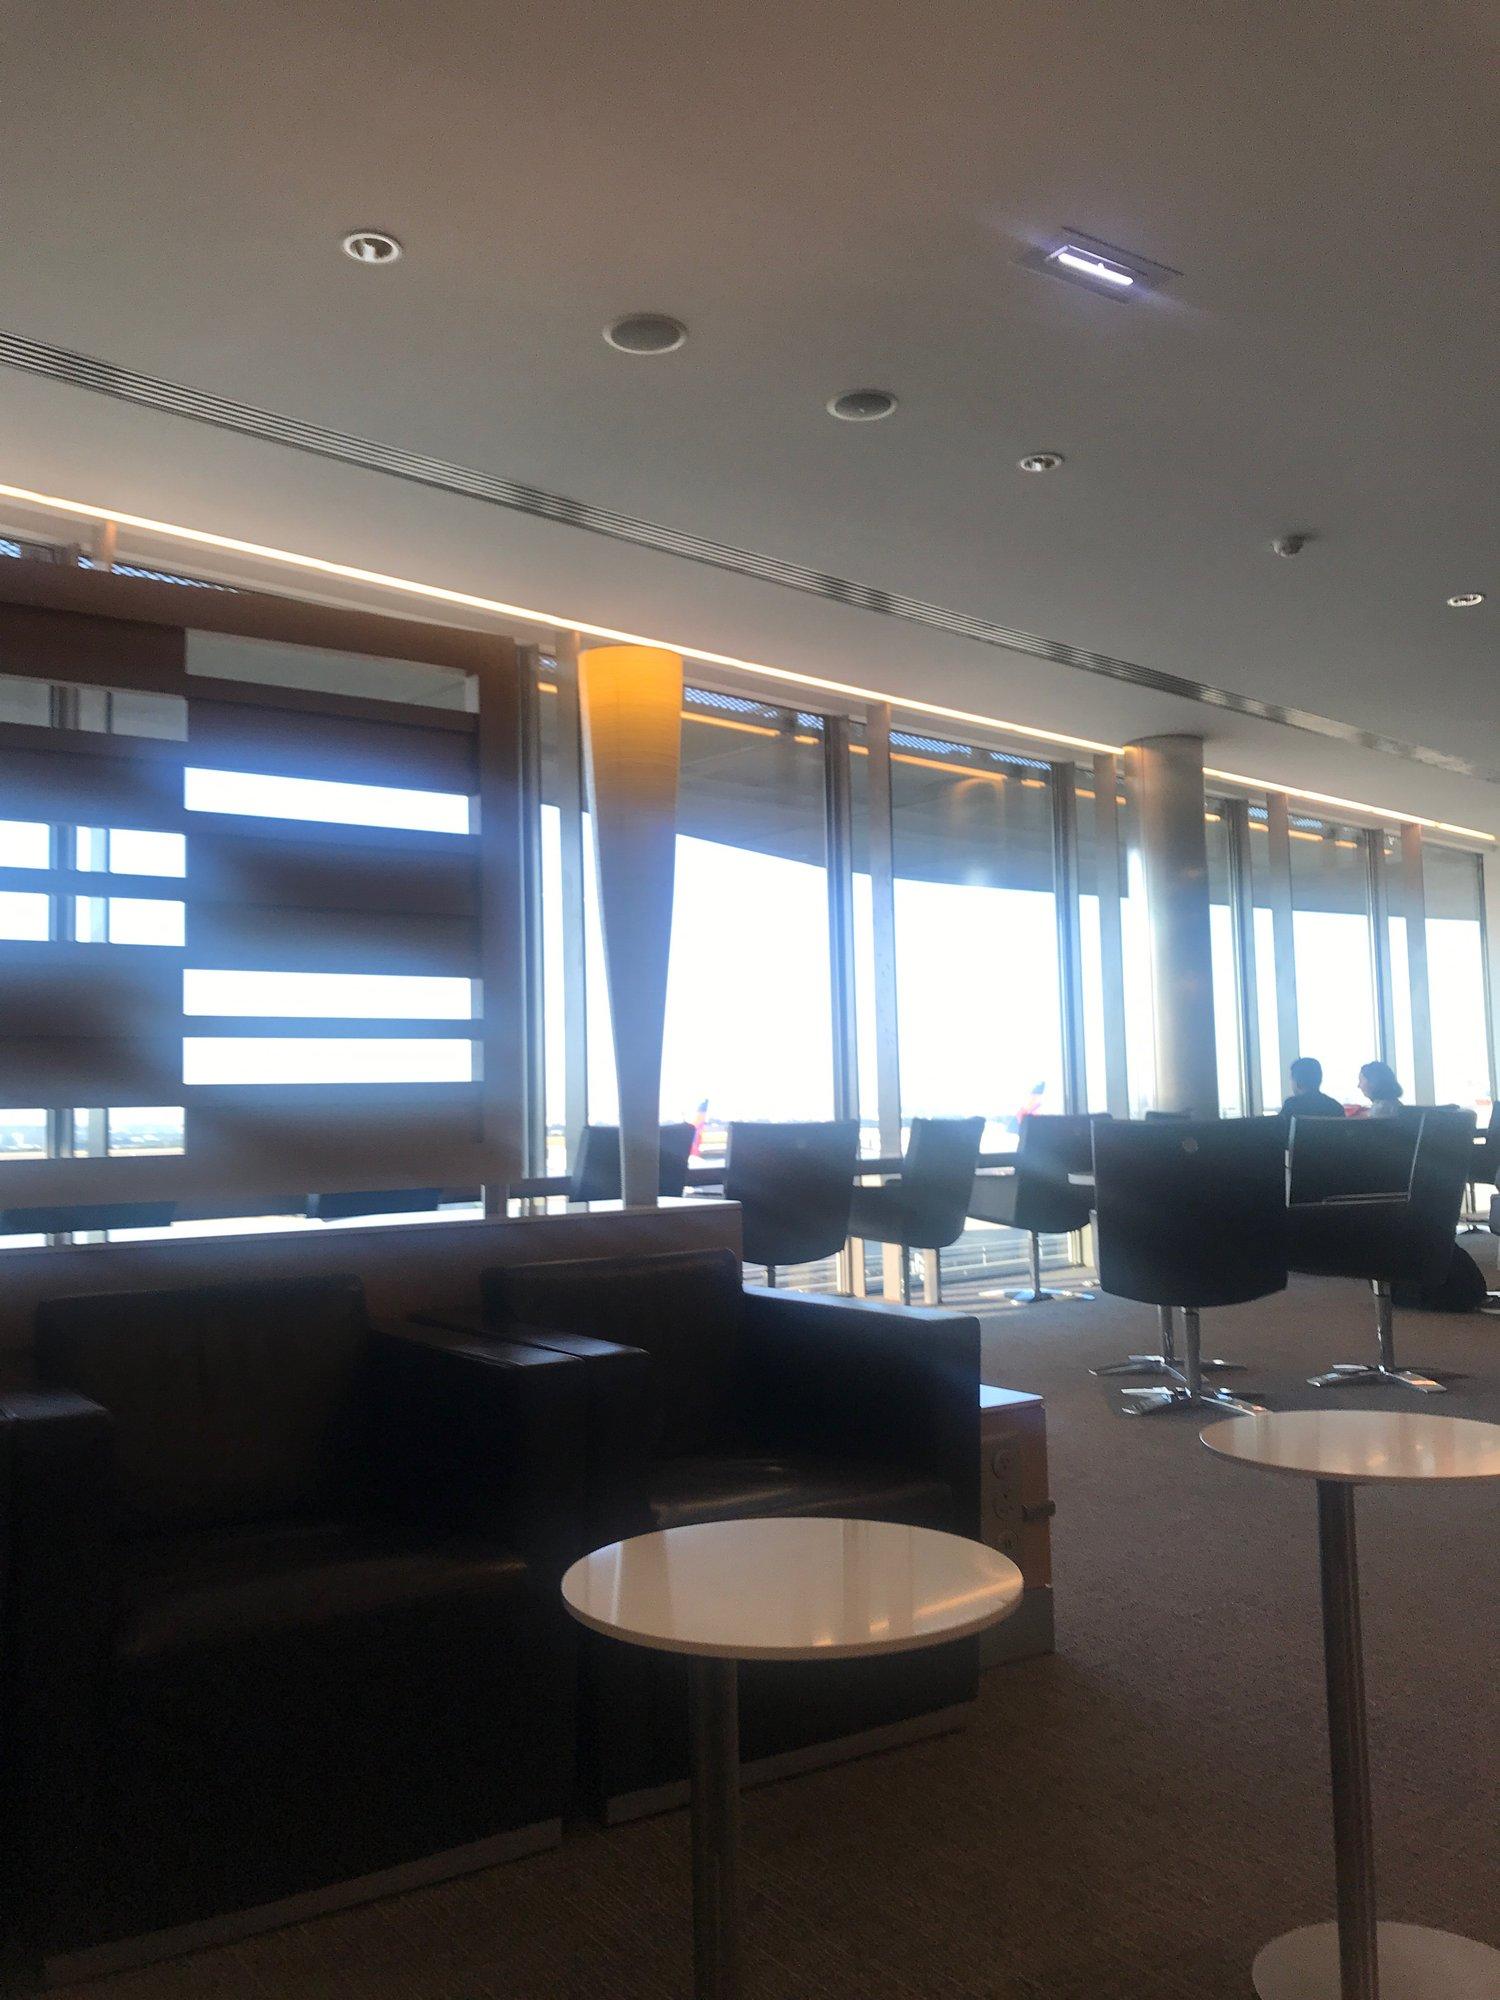 American Airlines Admirals Club  image 25 of 25